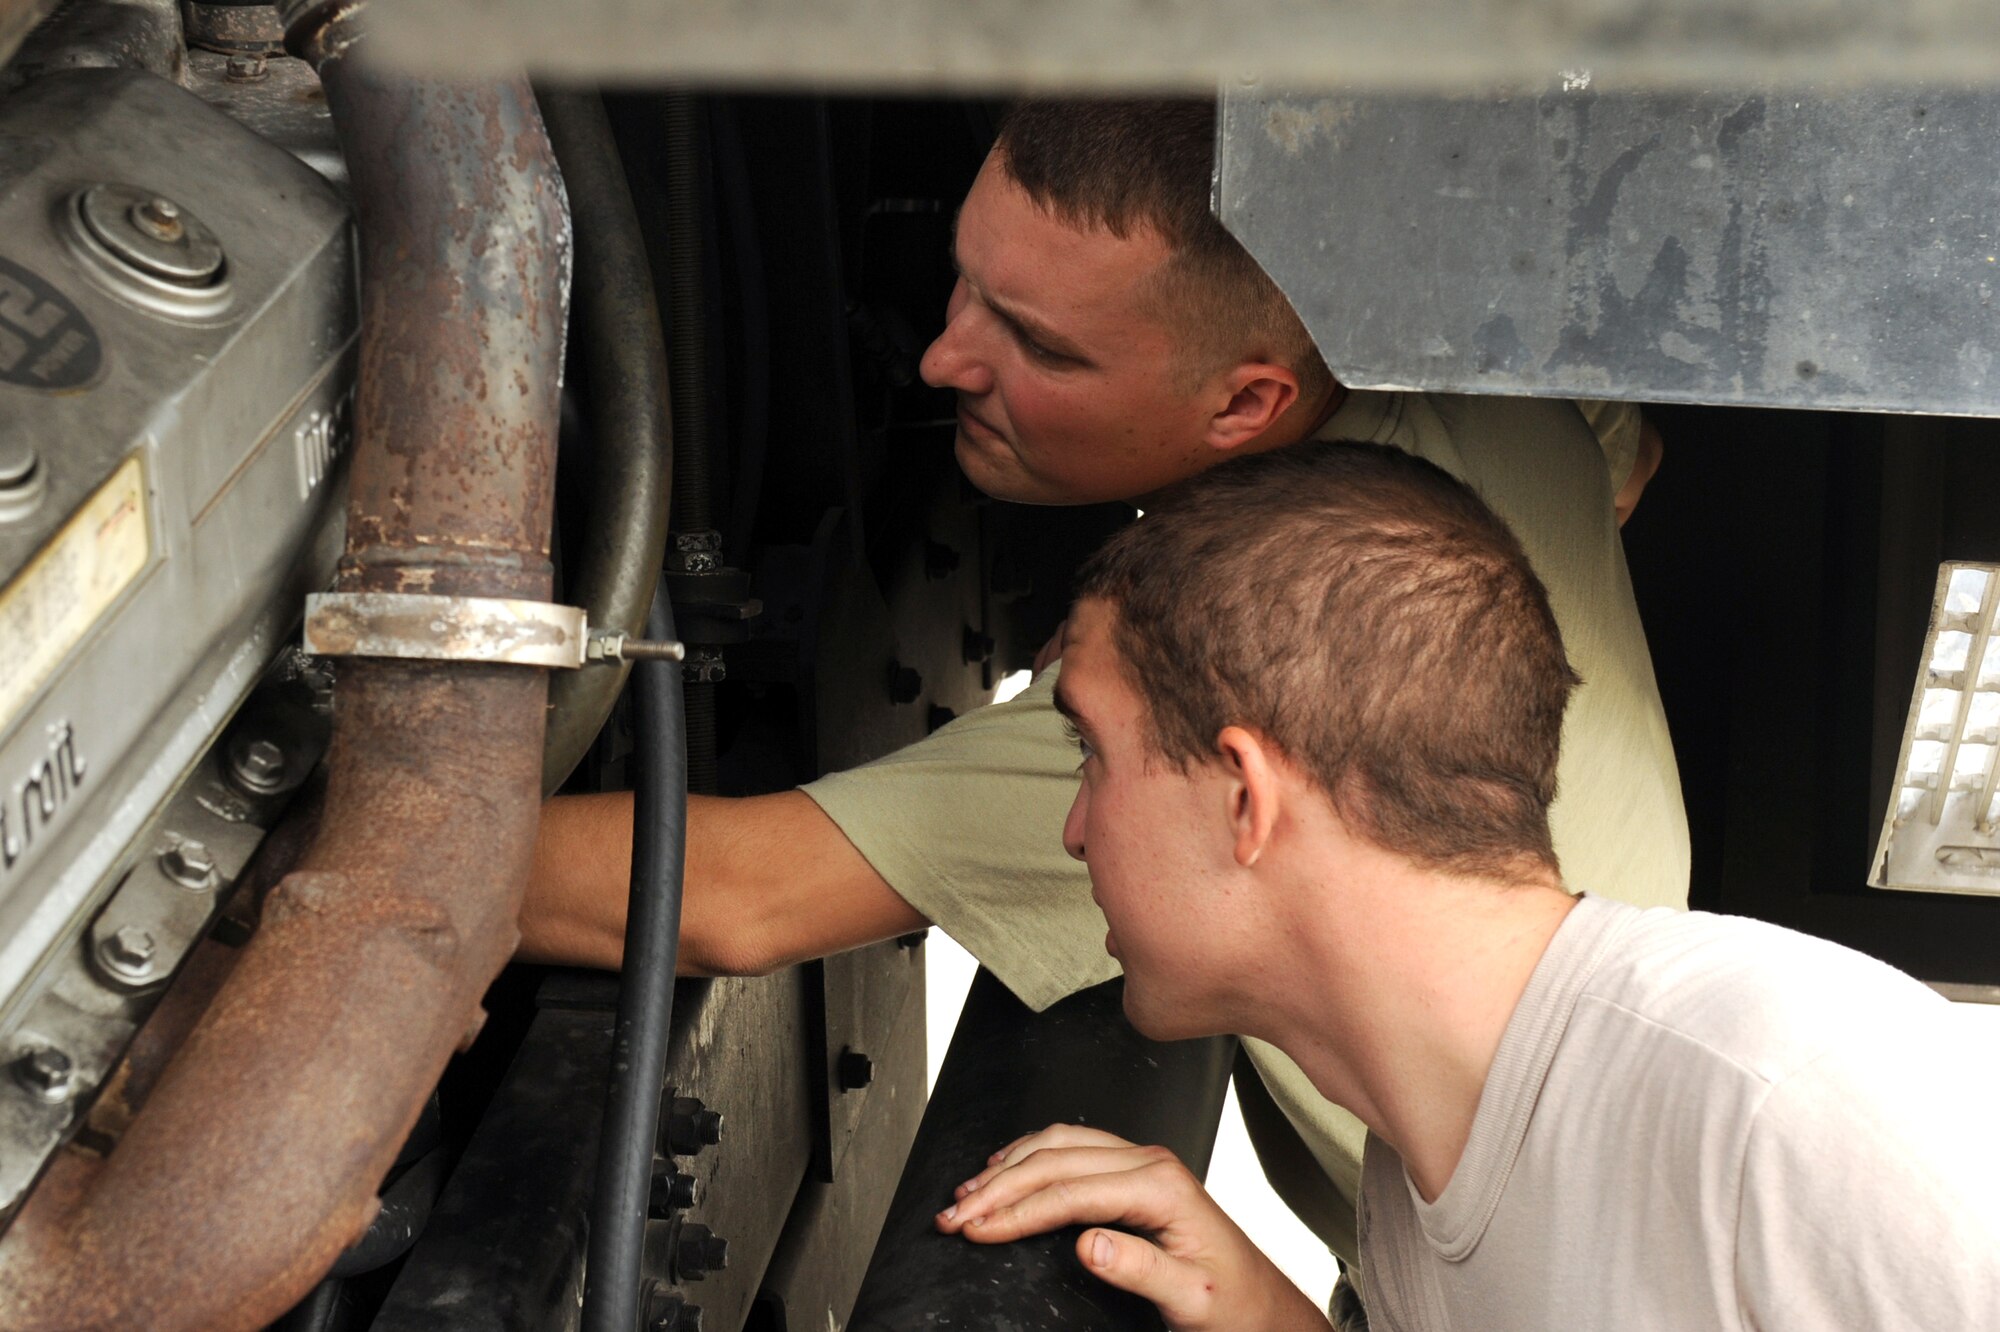 Staff Sgt. Tyler Gardner and Airman 1st Class Jason Birdsong (front) inspect the belt on an engine during a routine weekly inspection at Seymour Johnson Air Force Base, N.C., Sept. 27, 2011. Fire truck maintainers are the only Airmen authorized to work on military fire trucks and are required to have a minimum of two trucks serviceable at all times. Gardner and Birdsong are both 4th Logistics Readiness Squadron fire truck maintainers. Birdsong is a native of Thomaston, Ga. and Gardner is a native of Haleyville, Ala. (U.S. Air Force photo by Senior Airman Whitney Stanfield)